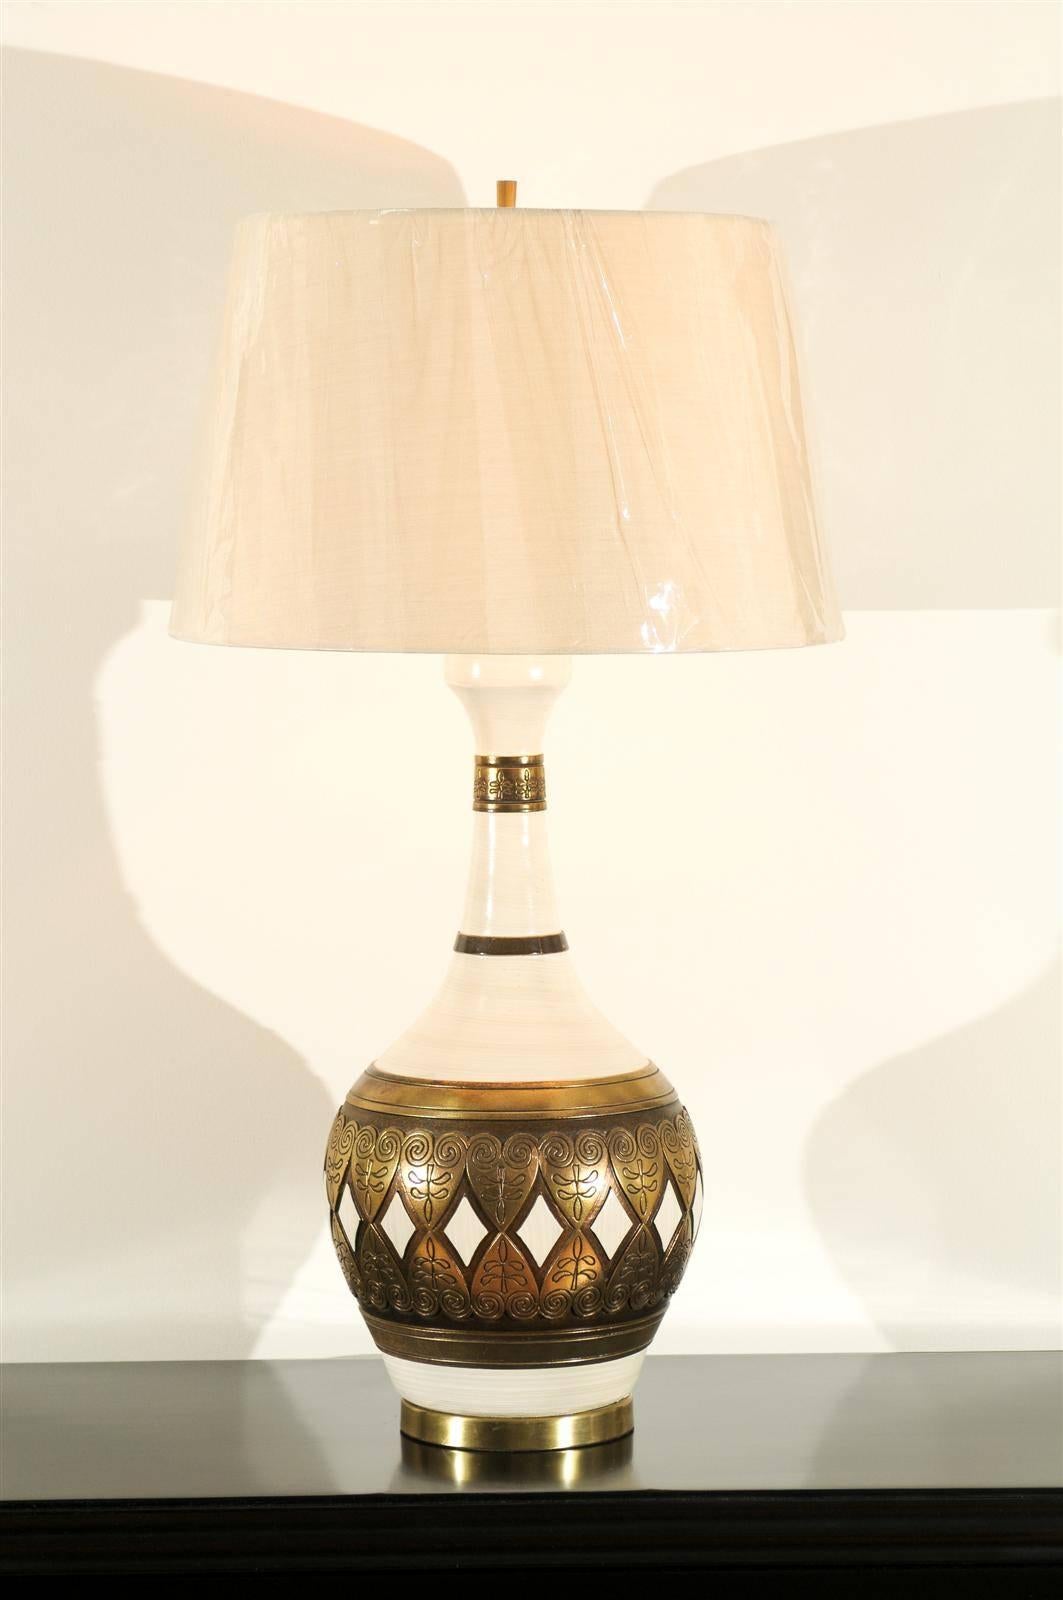 A spectacular pair of large-scale vintage lamps by Fortune Lamp Company, circa 1961. Cream ceramic vessels with fabulous gold detail which portrays the look of genuine forged brass. Remarkable design and craftsmanship. This small boutique lighting